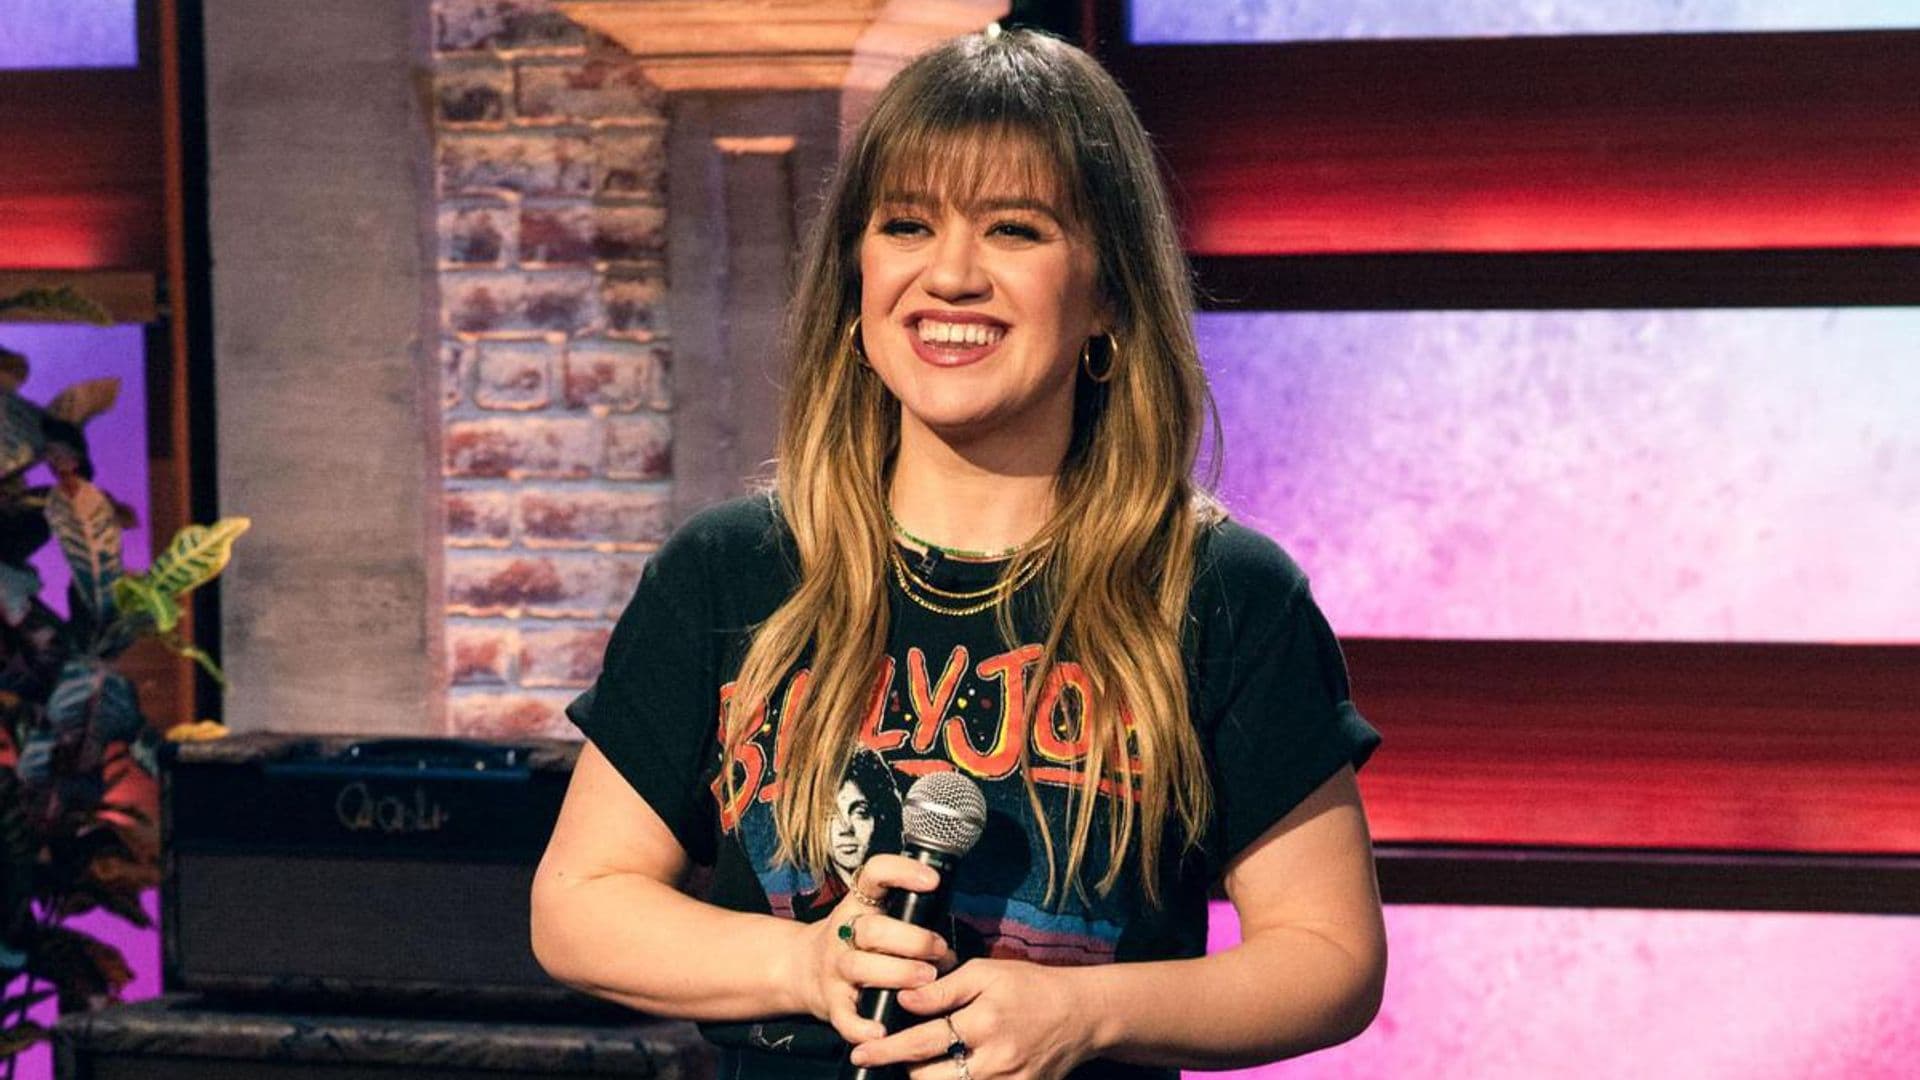 Kelly Clarkson shares new images that show off her weight loss progress